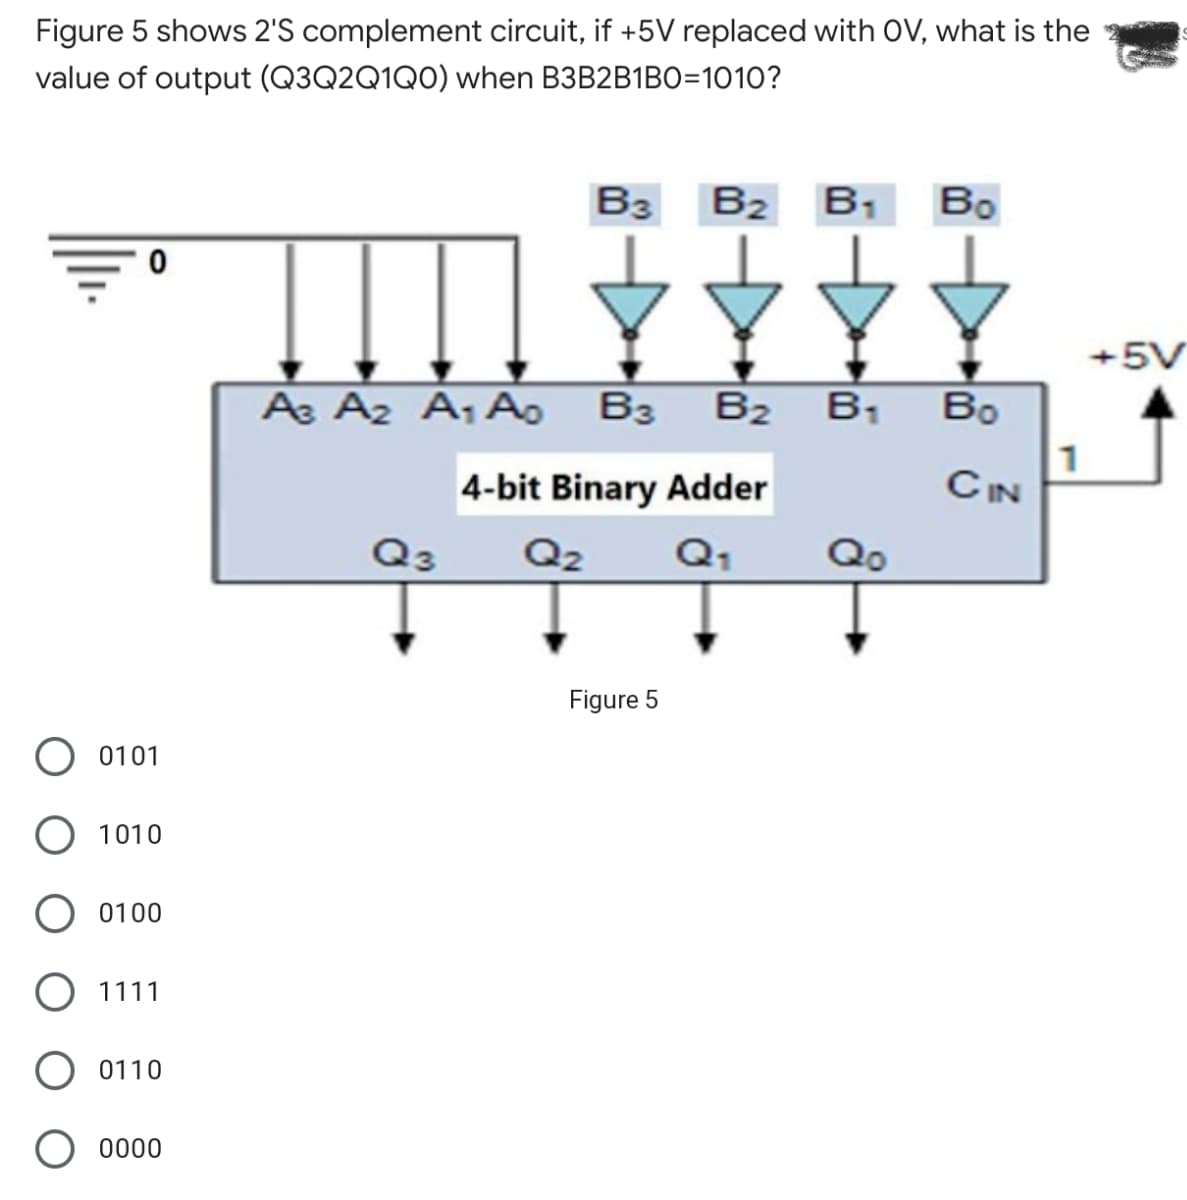 Figure 5 shows 2'S complement circuit, if +5V replaced with OV, what is the
value of output (Q3Q2Q1Q0) when B3B2B1BO=1010?
B3
B2
B1
Bo
+5V
As A2 A, Ao B3
B2
B1
4-bit Binary Adder
1
CIN
Q3
Q2
Q1
Qo
Figure 5
0101
O 1010
0100
O 1111
O 0110
0000
